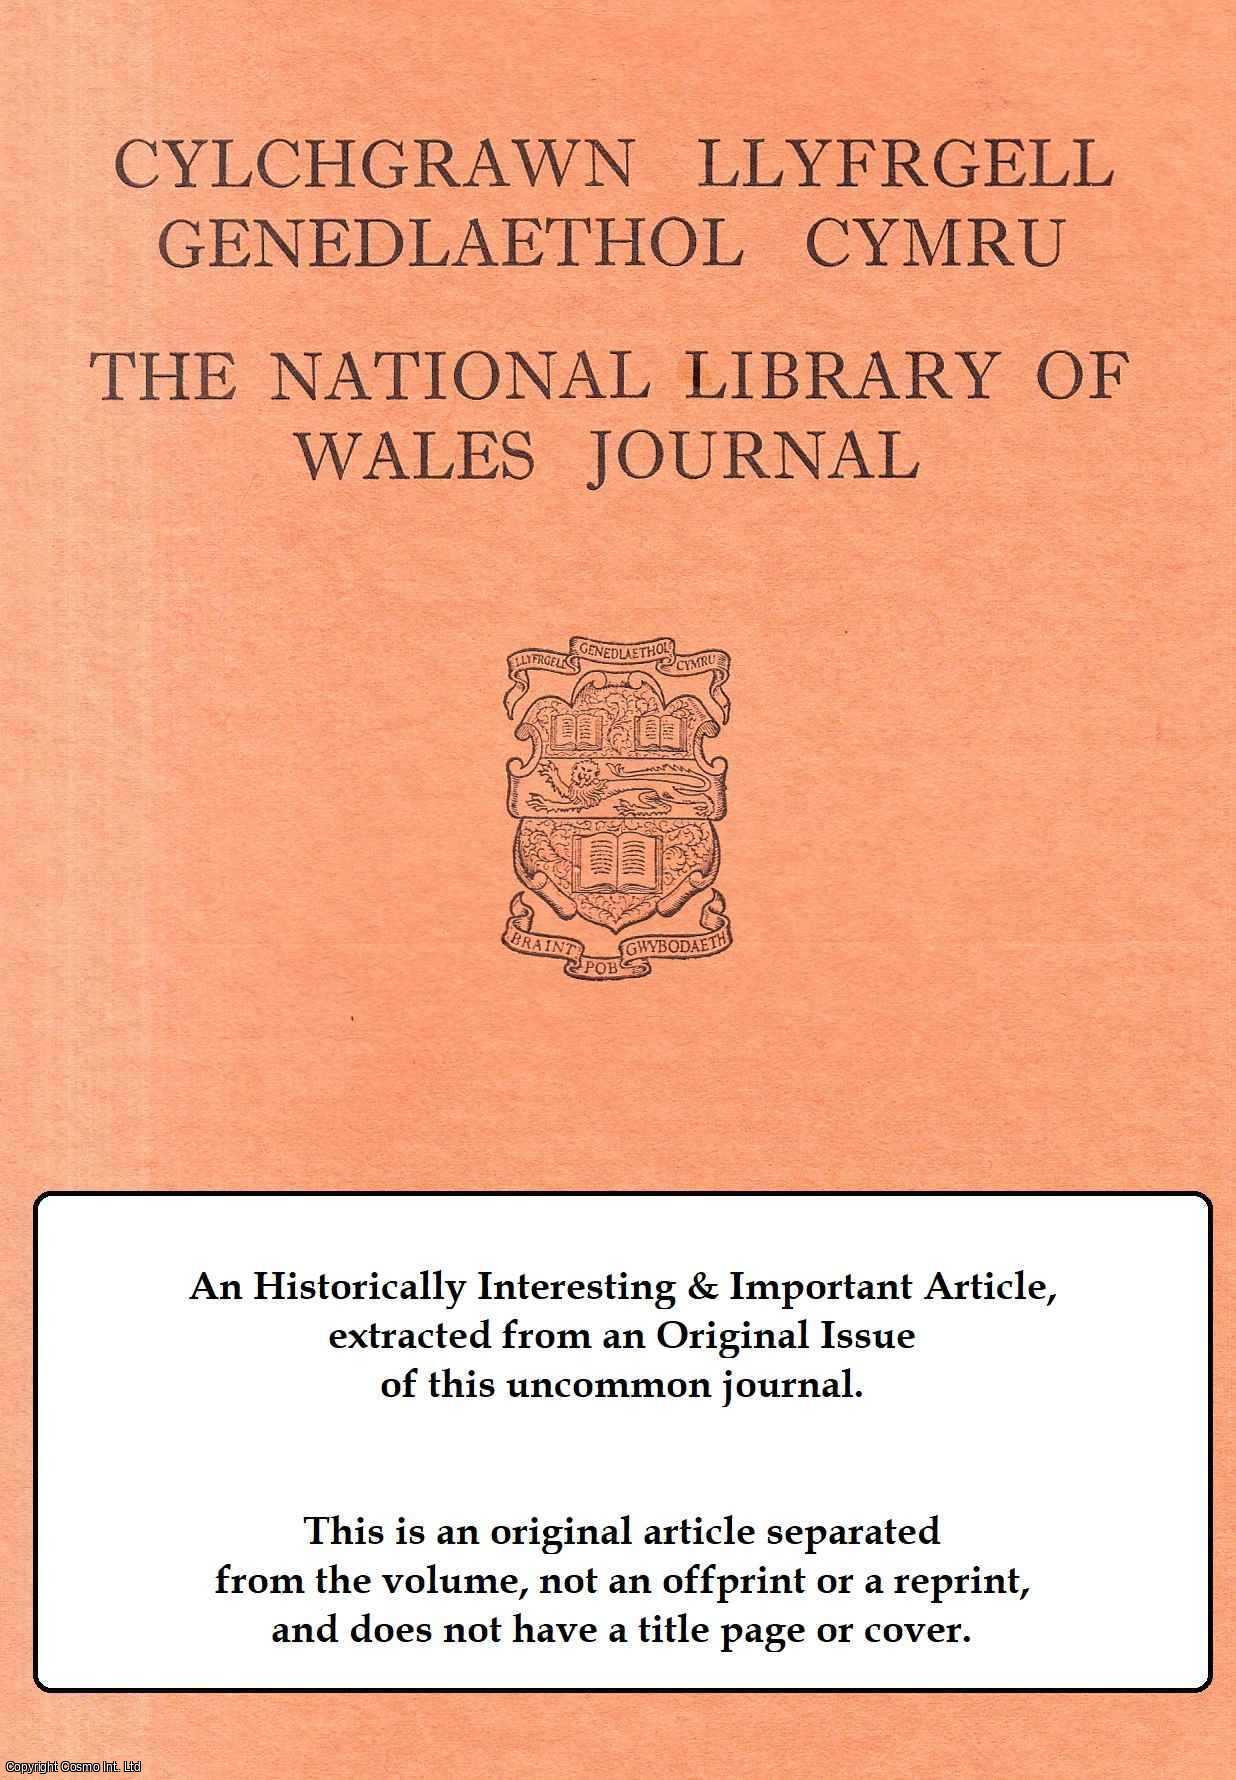 Daniel Huws - Gildas Prisei. An original article from The National Library of Wales Journal, 1972.